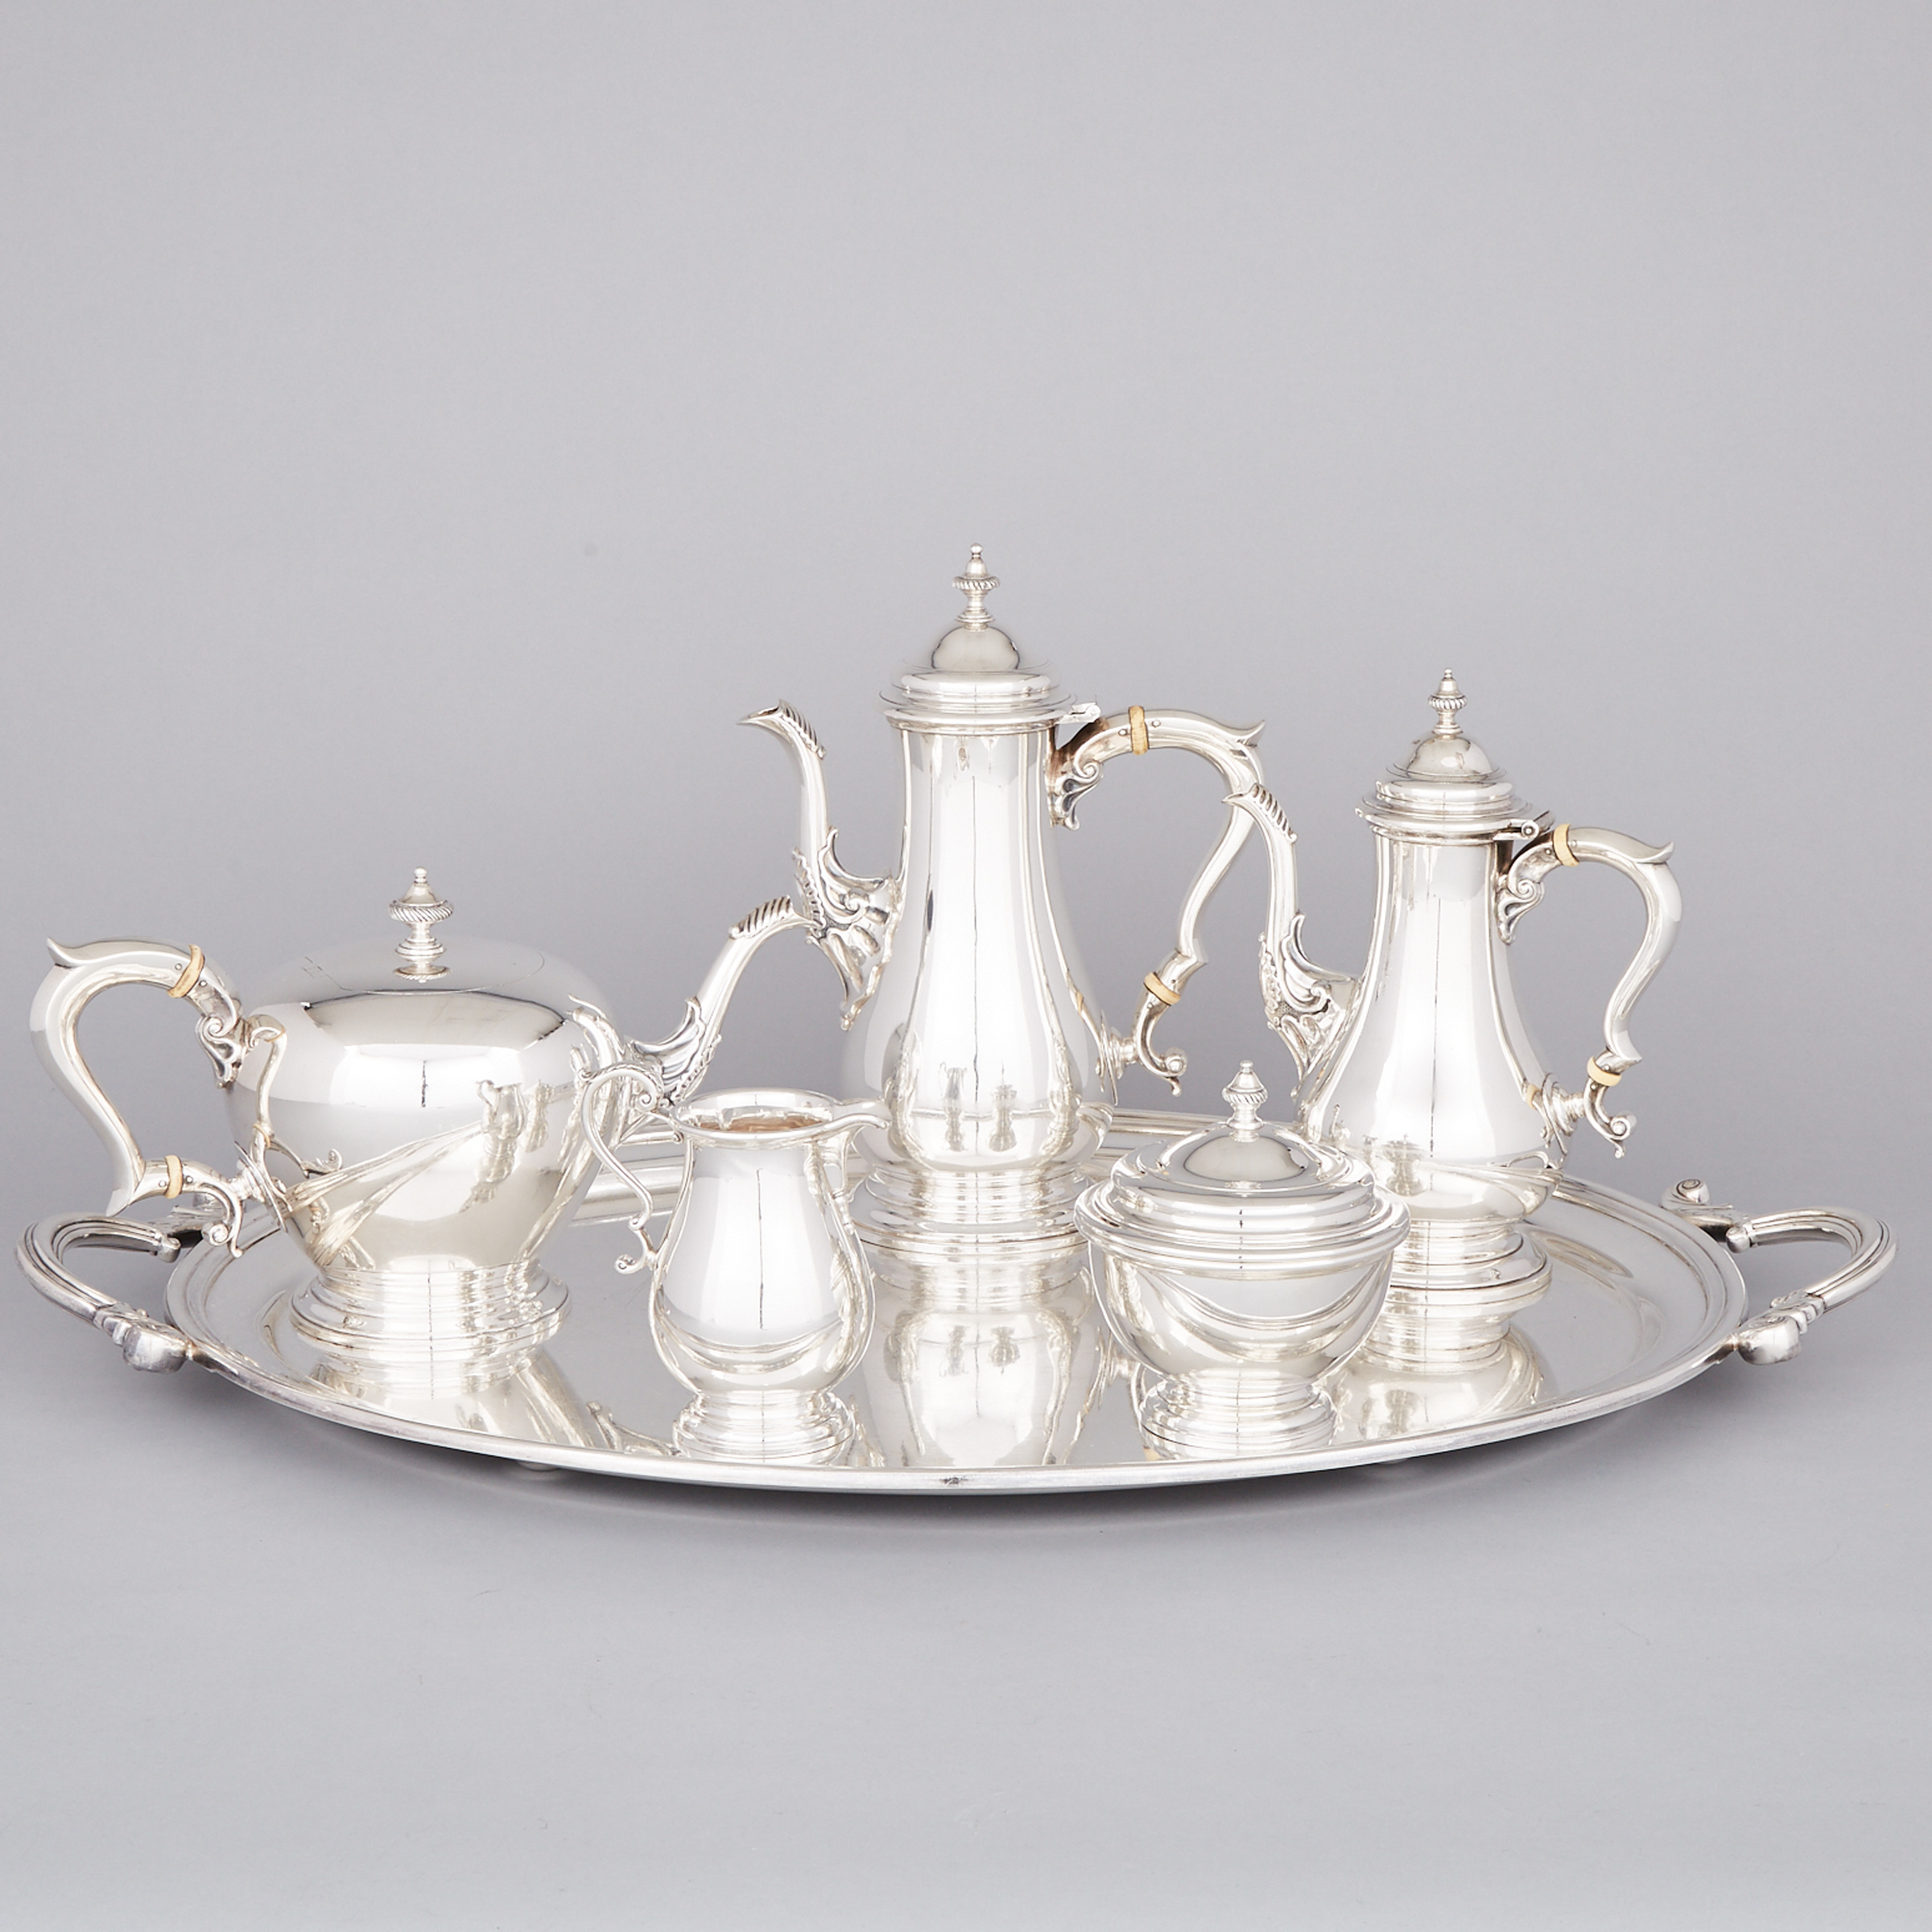 Canadian Silver Tea and Coffee Service, Henry Birks & Sons, Montreal, Que., 1958/59